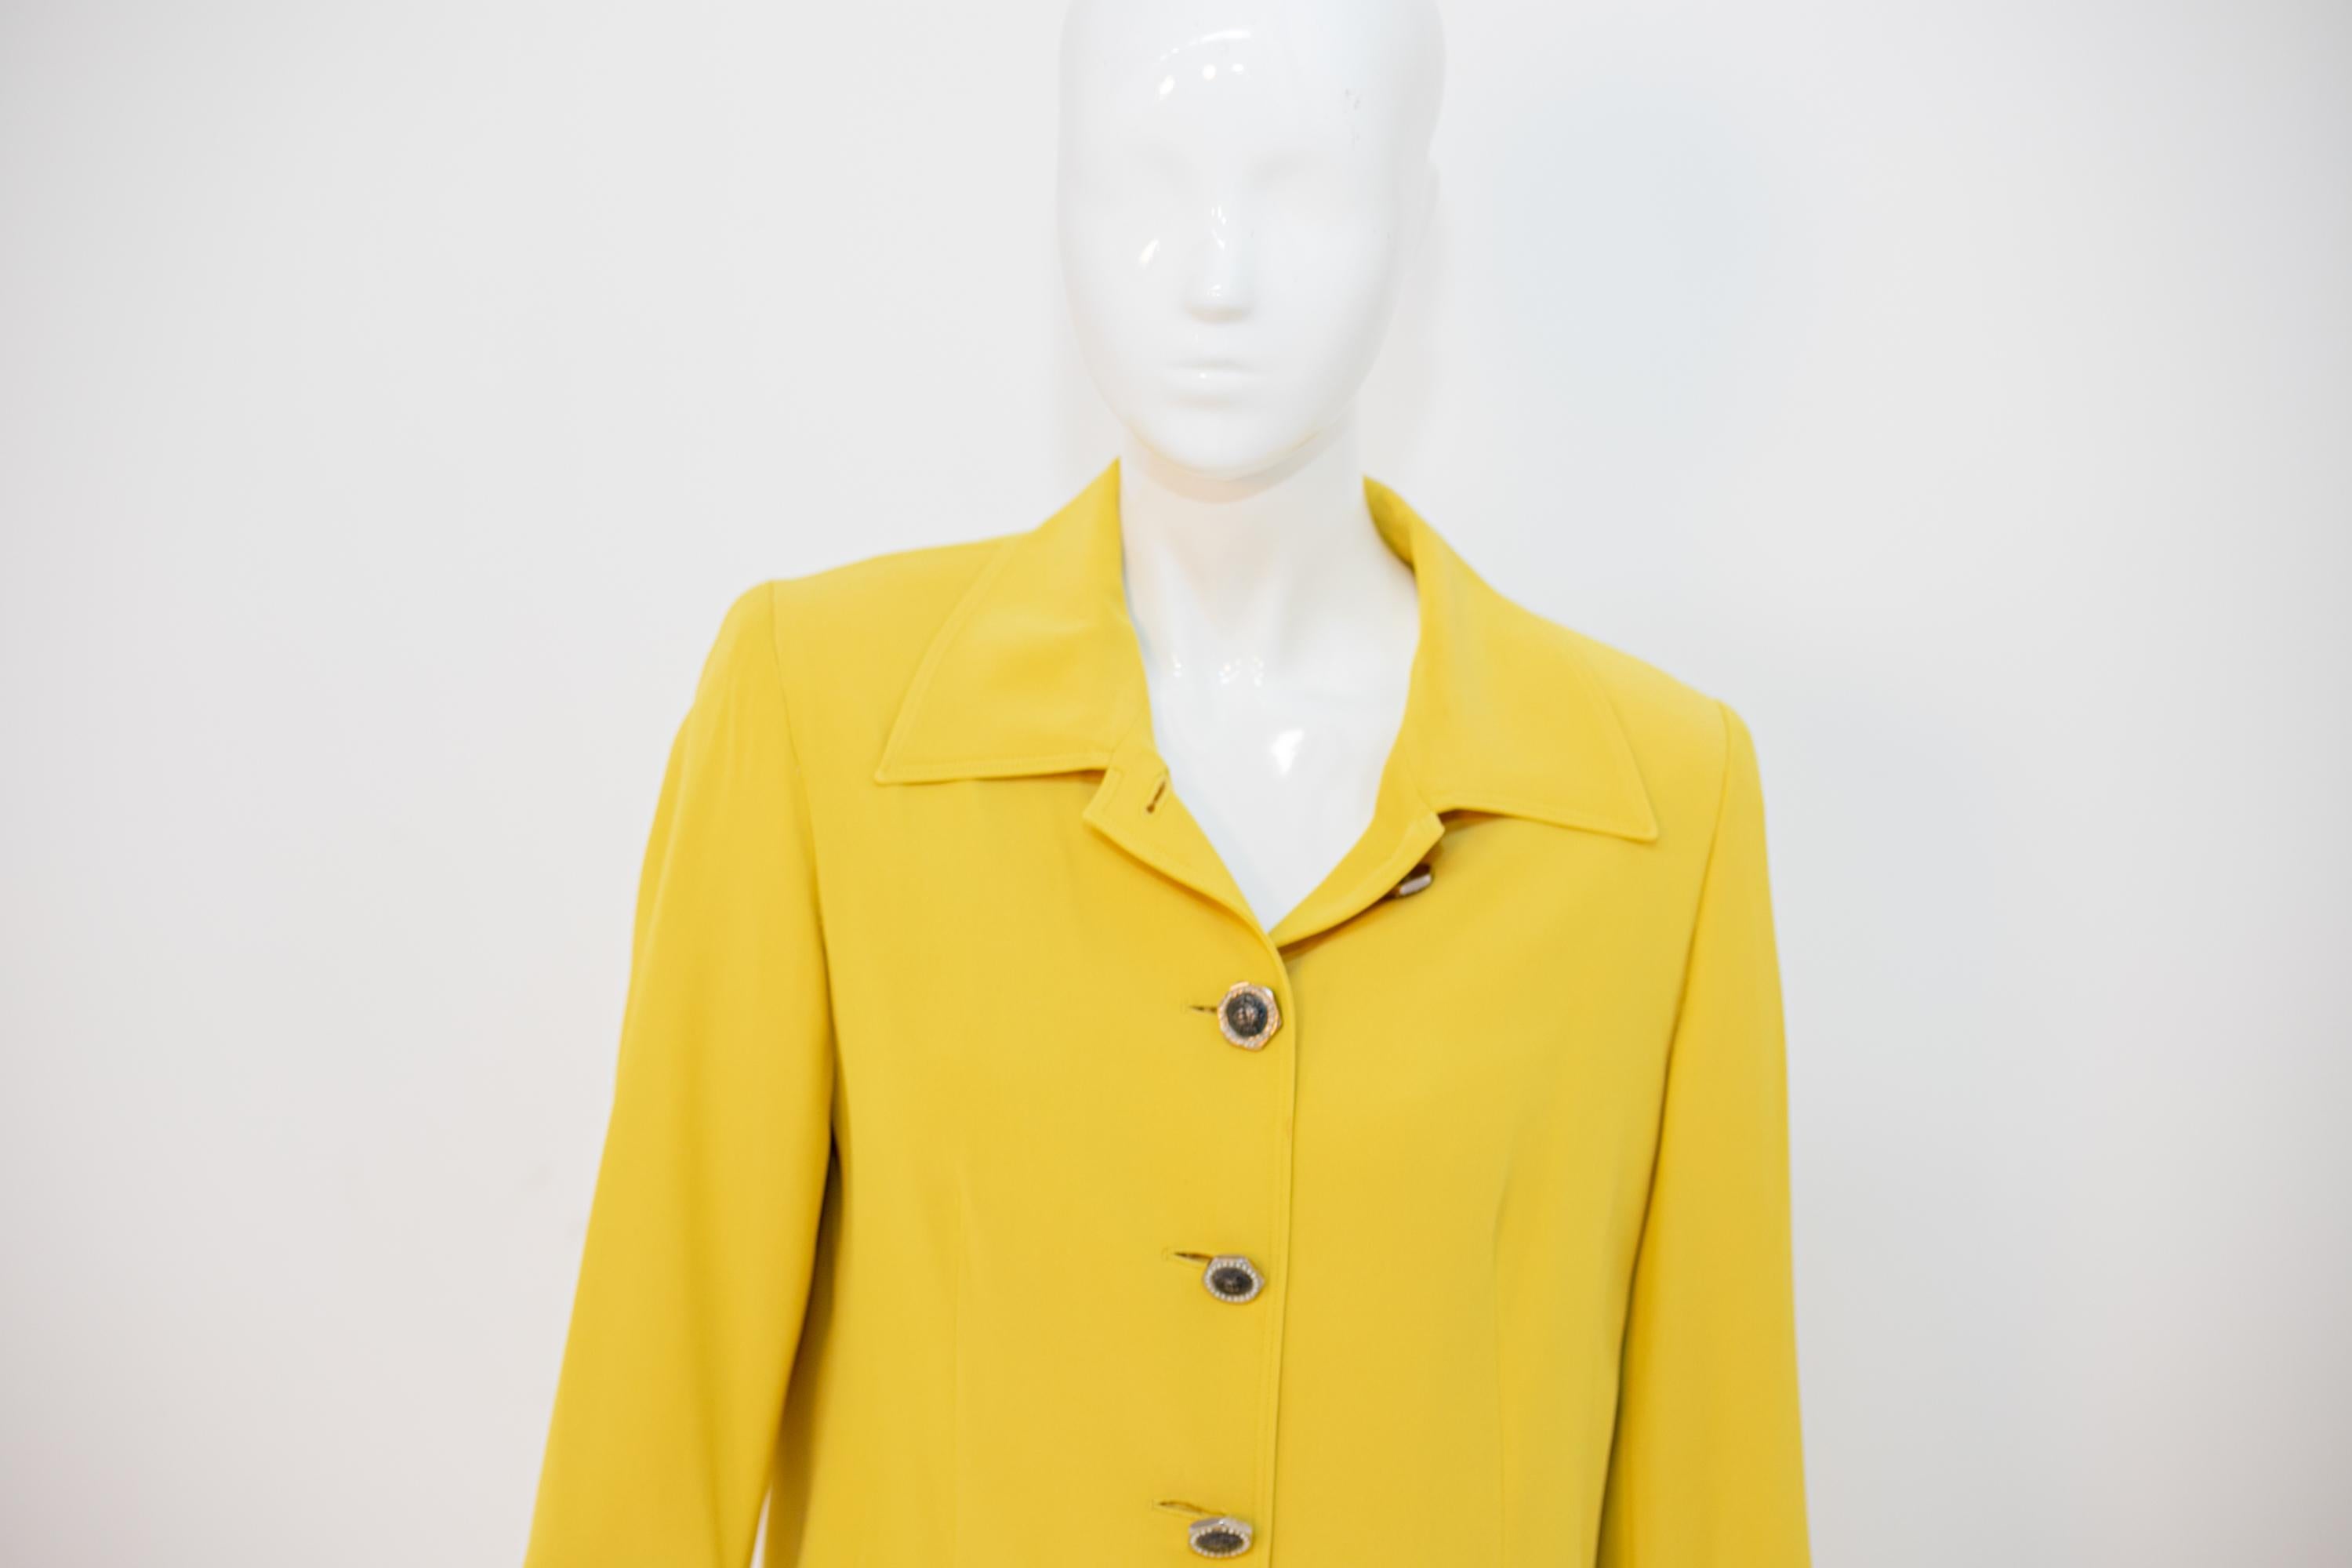 Bright Gianni Versace Yellow Two Piece Formal Suit For Sale 5